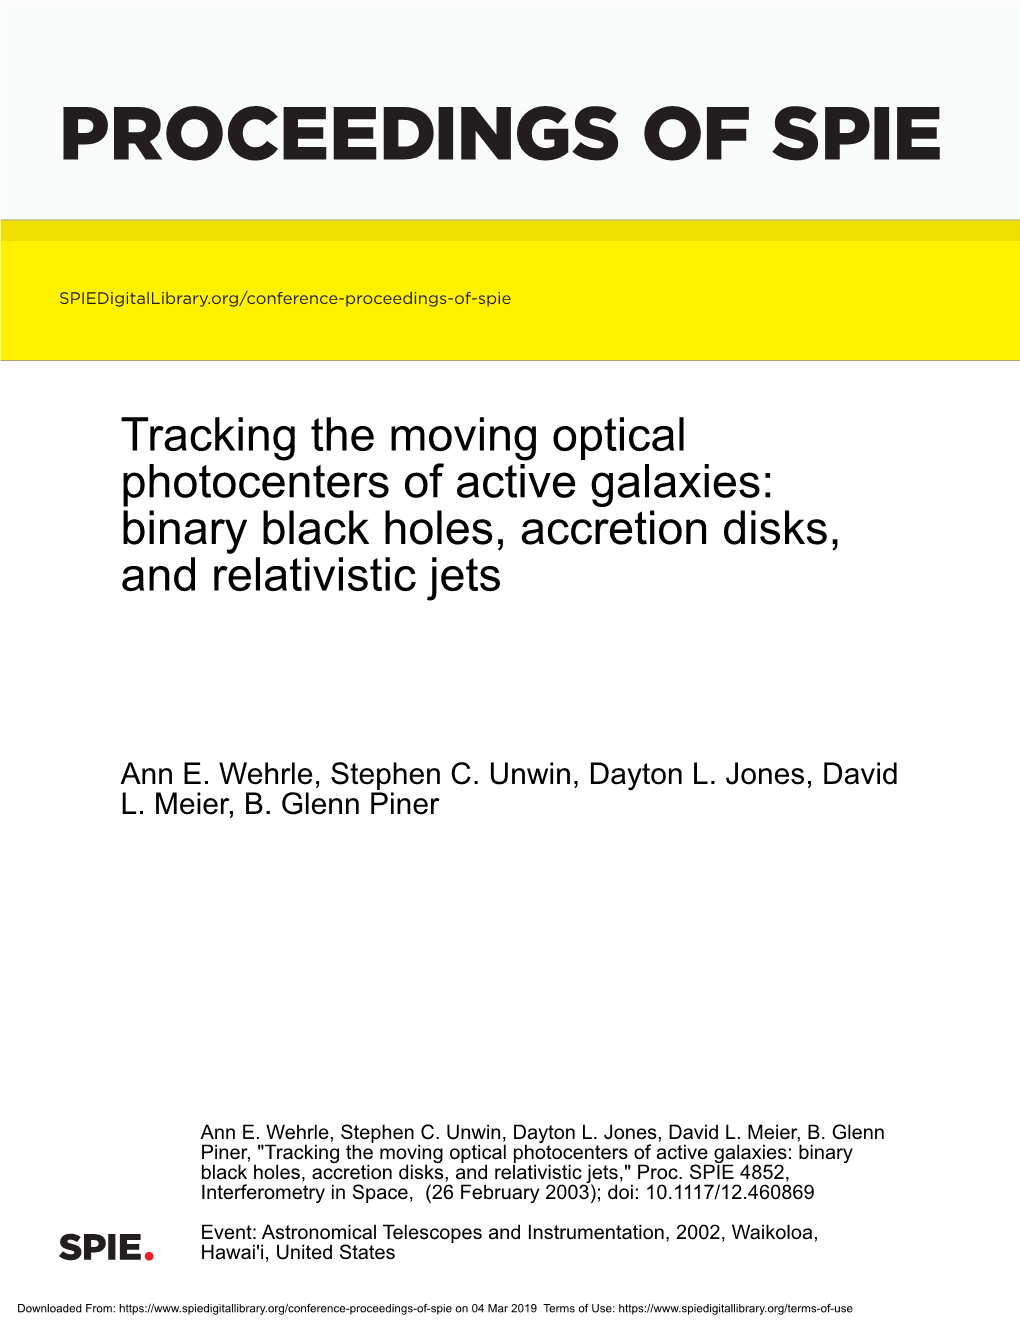 Tracking the Moving Optical Photocenters of Active Galaxies: Binary Black Holes, Accretion Disks and Relativistic Jets A